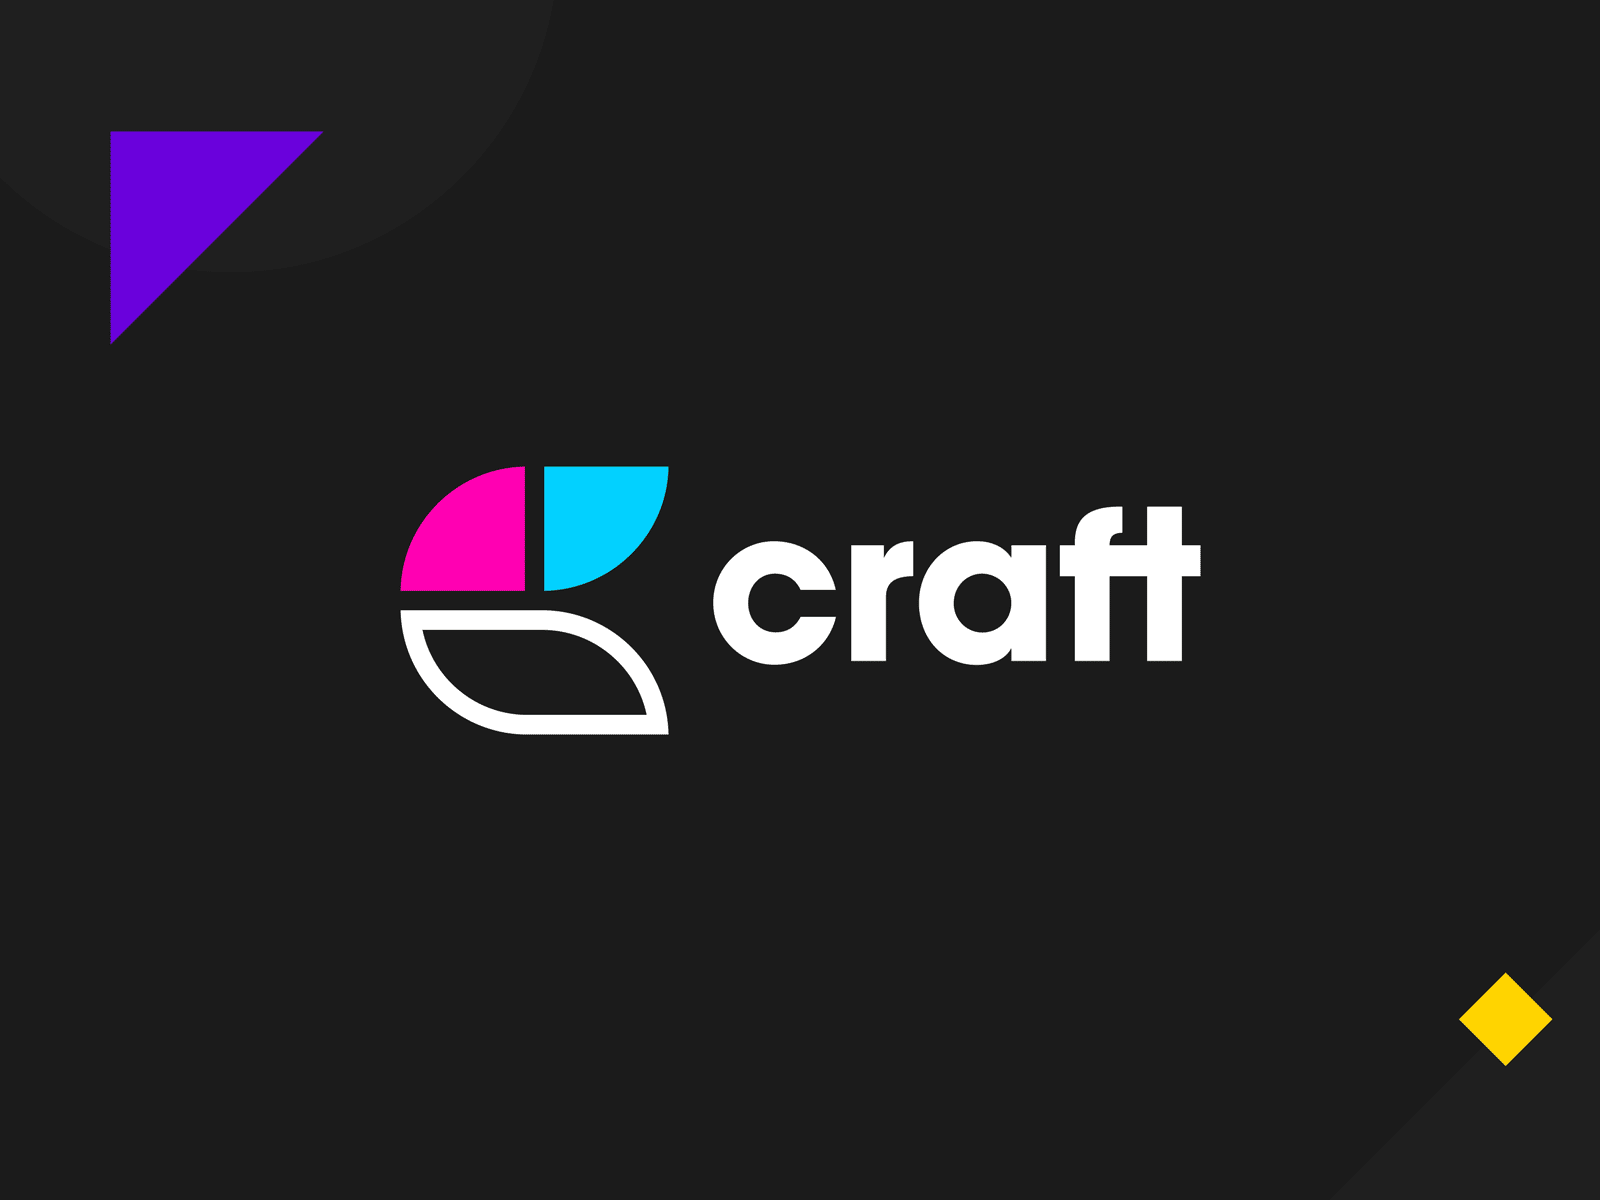 Brand Elements for Craft